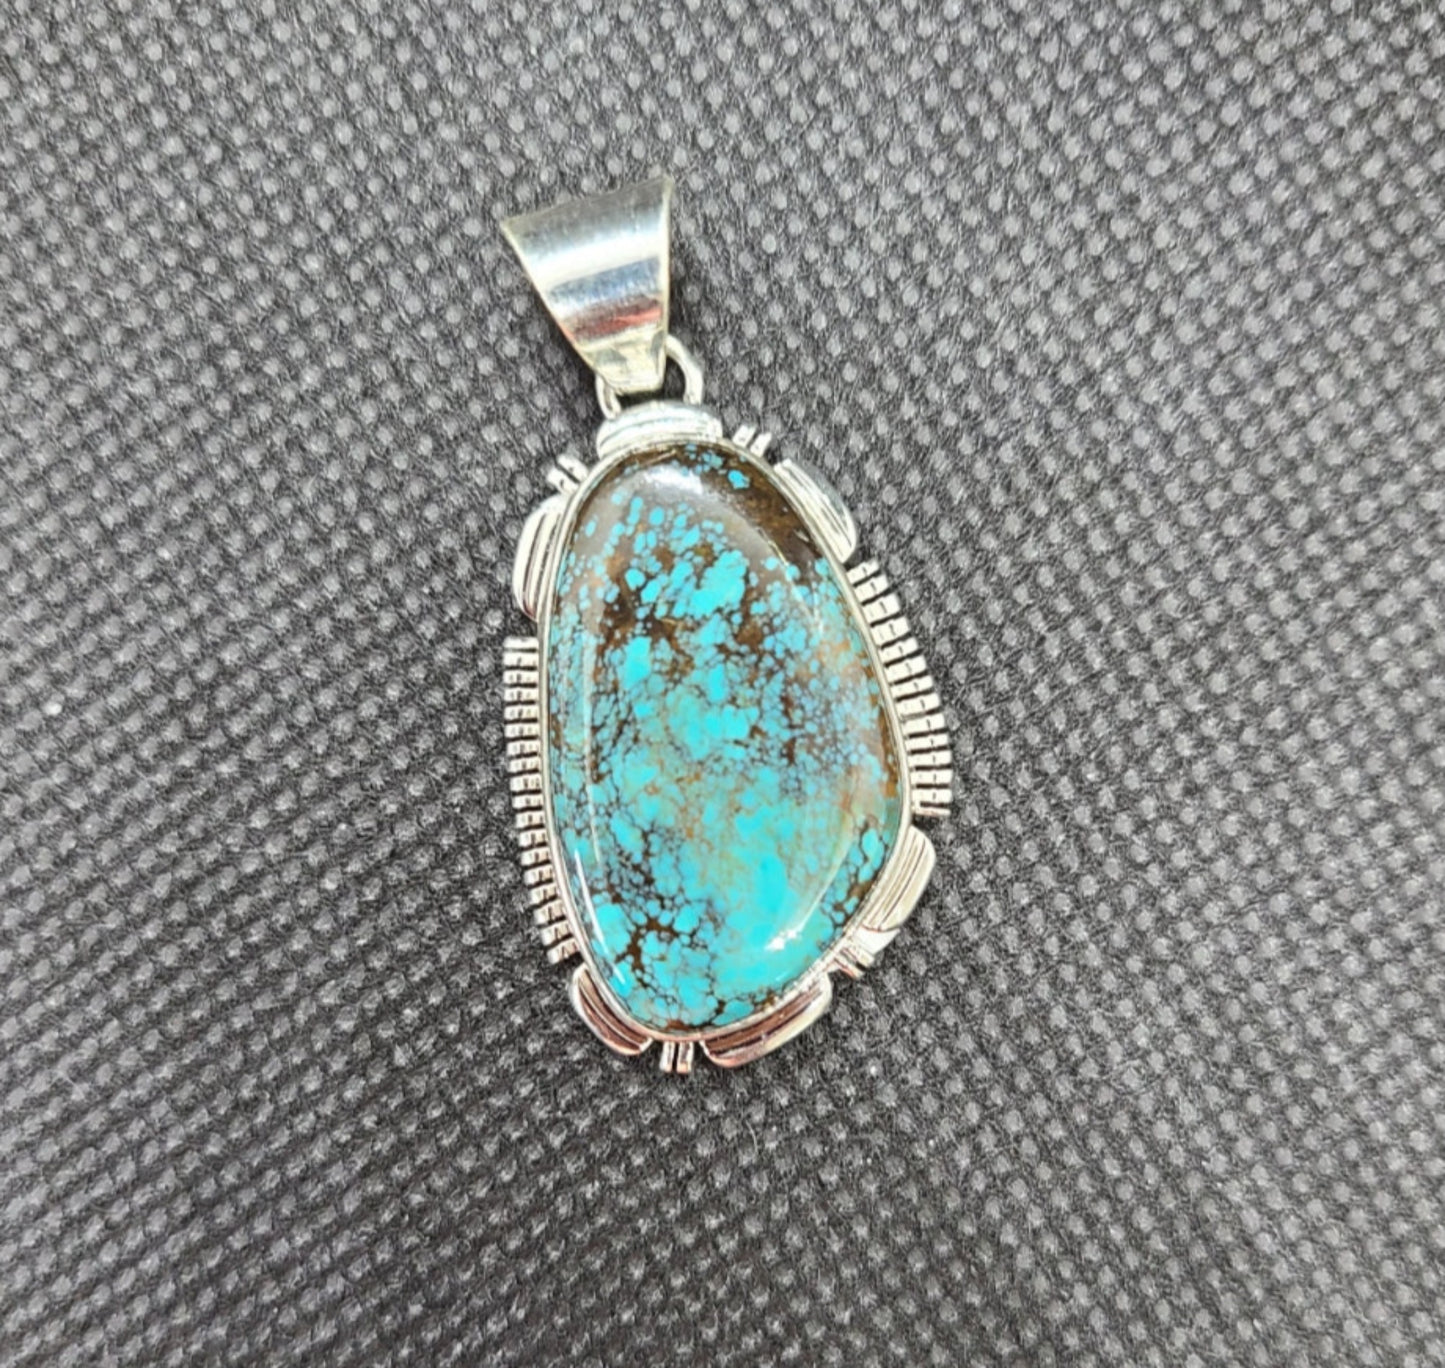 New with tags! Beautiful Bisbee Turquoise pendant by Navajo Artist, Larry M. Yazzie. Bisbee Turquoise is very rare and comes from the Bisbee Mine in Arizona which was closed in 1975.  There is very little Bisbee Turquoise available today and due to it's rarity and exceptional beauty it is very valuable. The stone is set in a Sterling Silver bezel with saw cuts.  The bail is large enough to accommodate most any chain or leather. MSRP: $500  Item will be shipped insured and a Signature will be required.